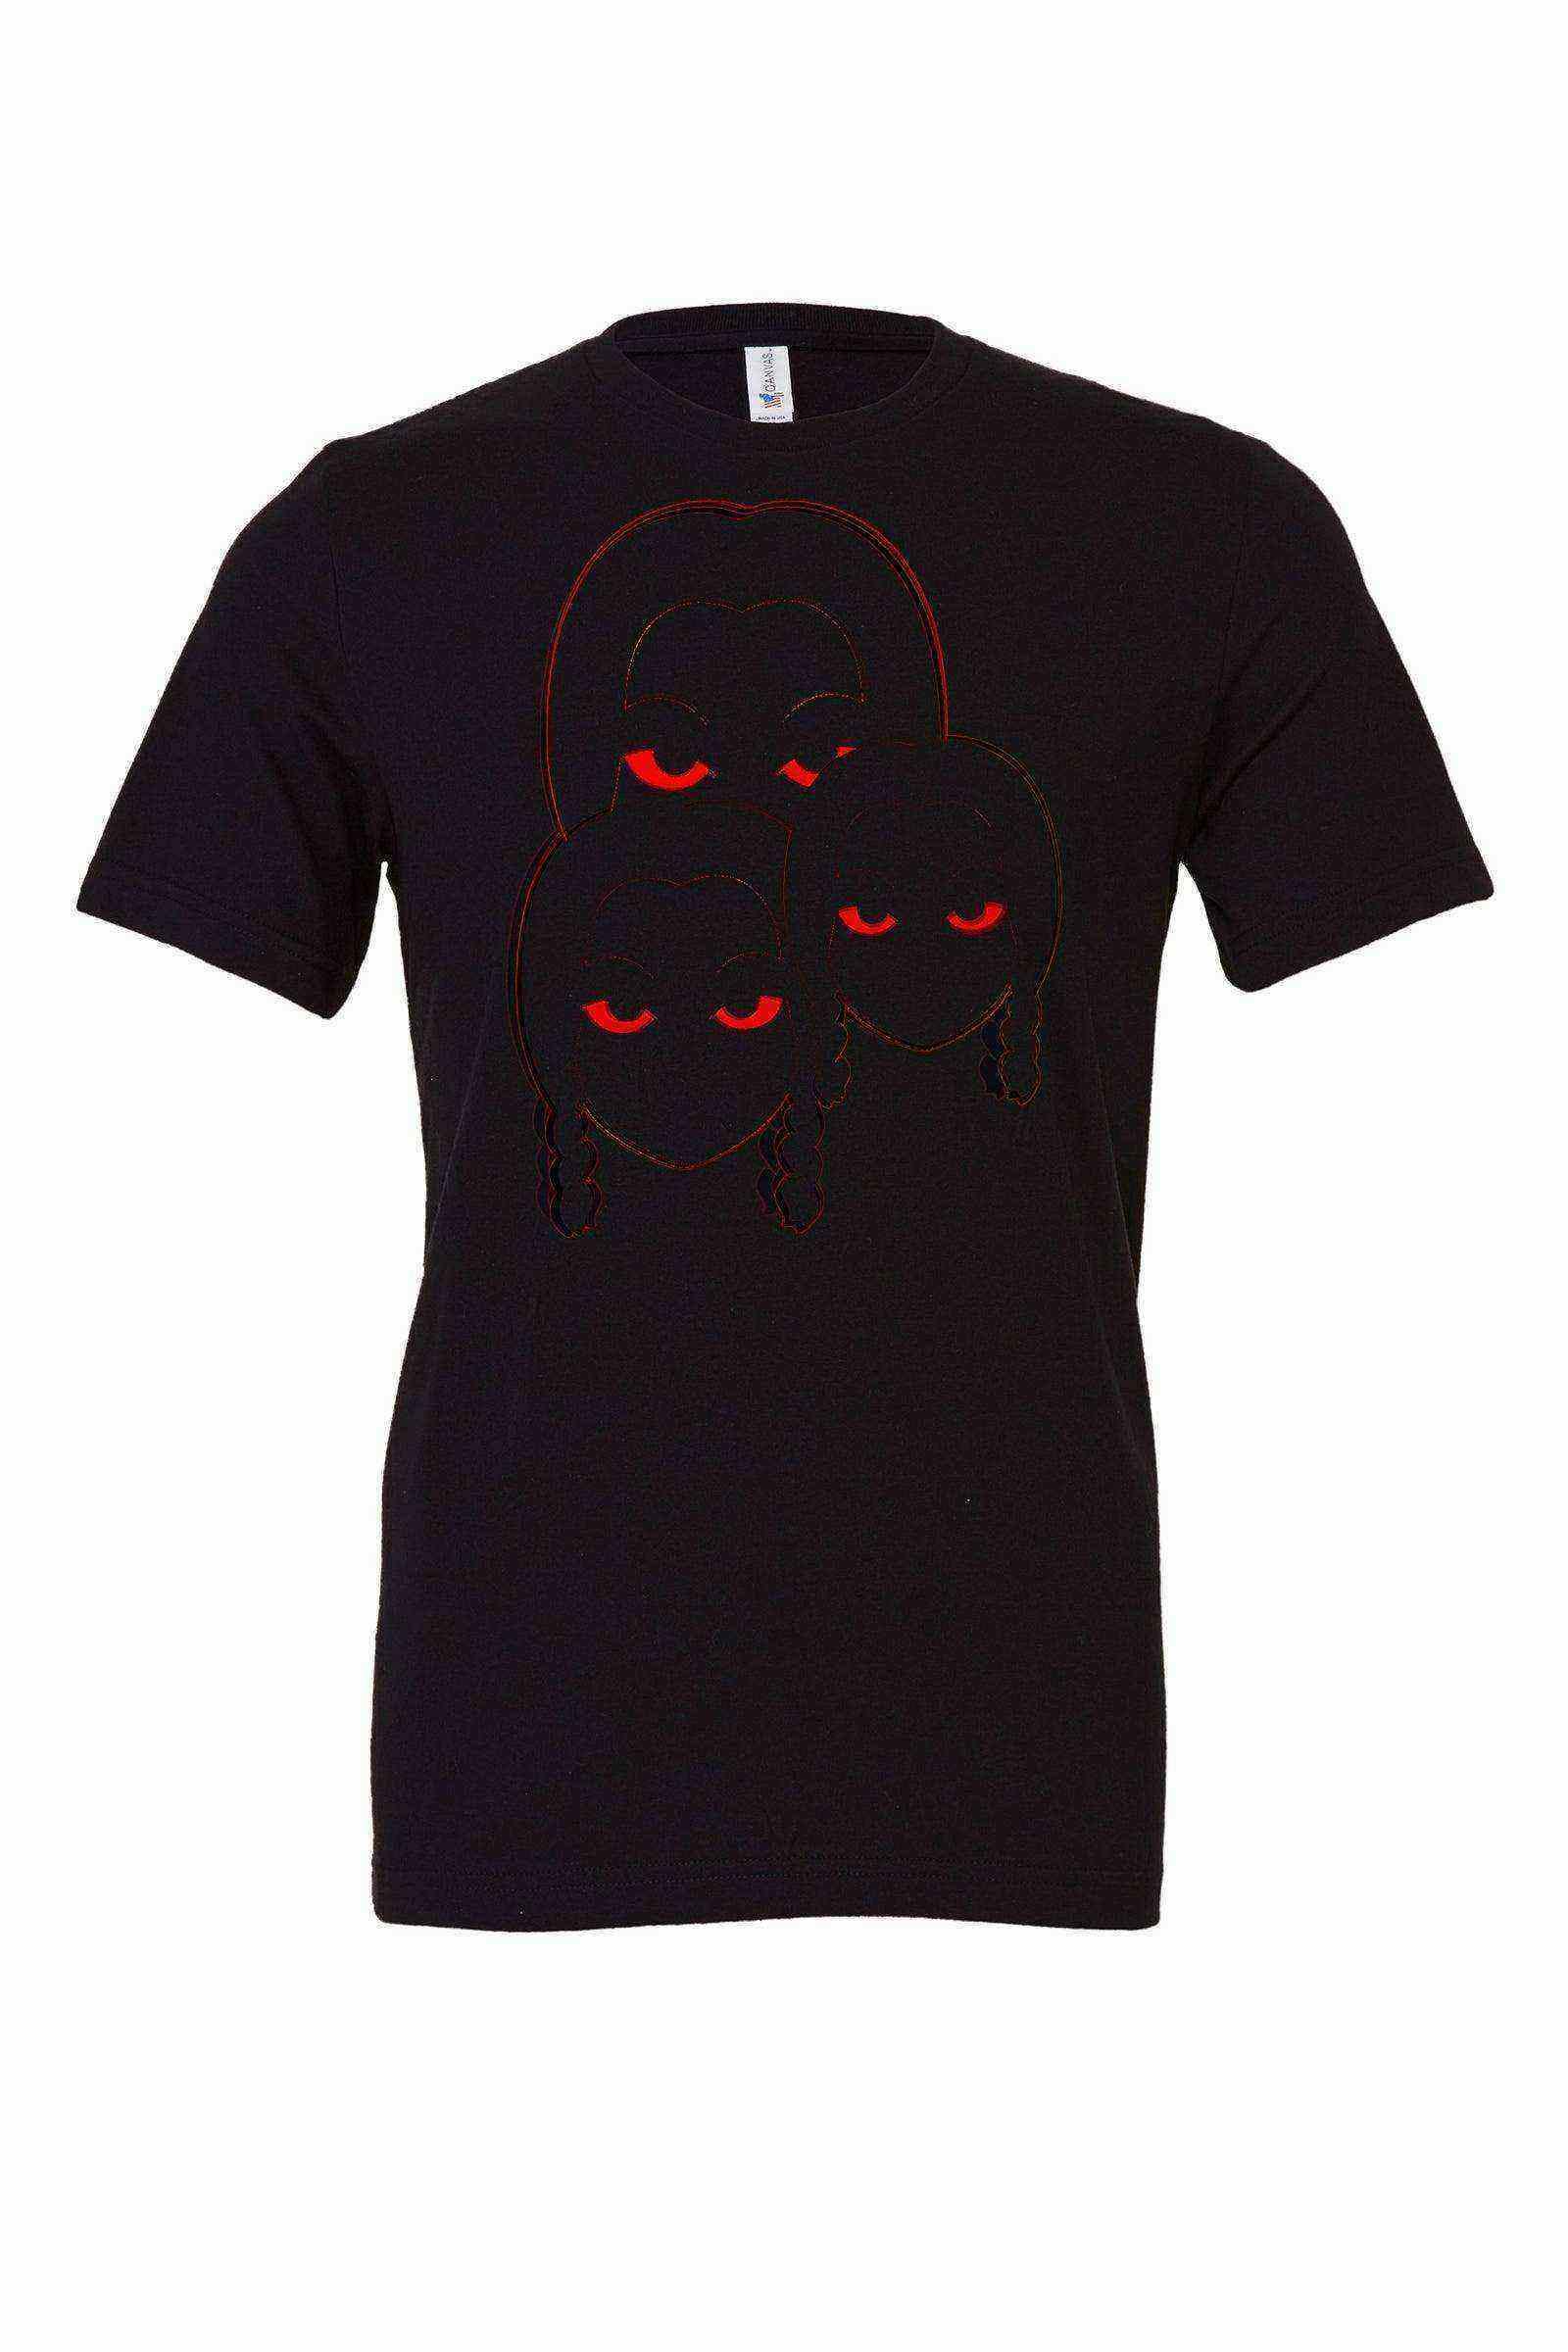 Youth | Creepy Wednesday Shirt | The Addams Shirt | Red Wednesday - Dylan's Tees